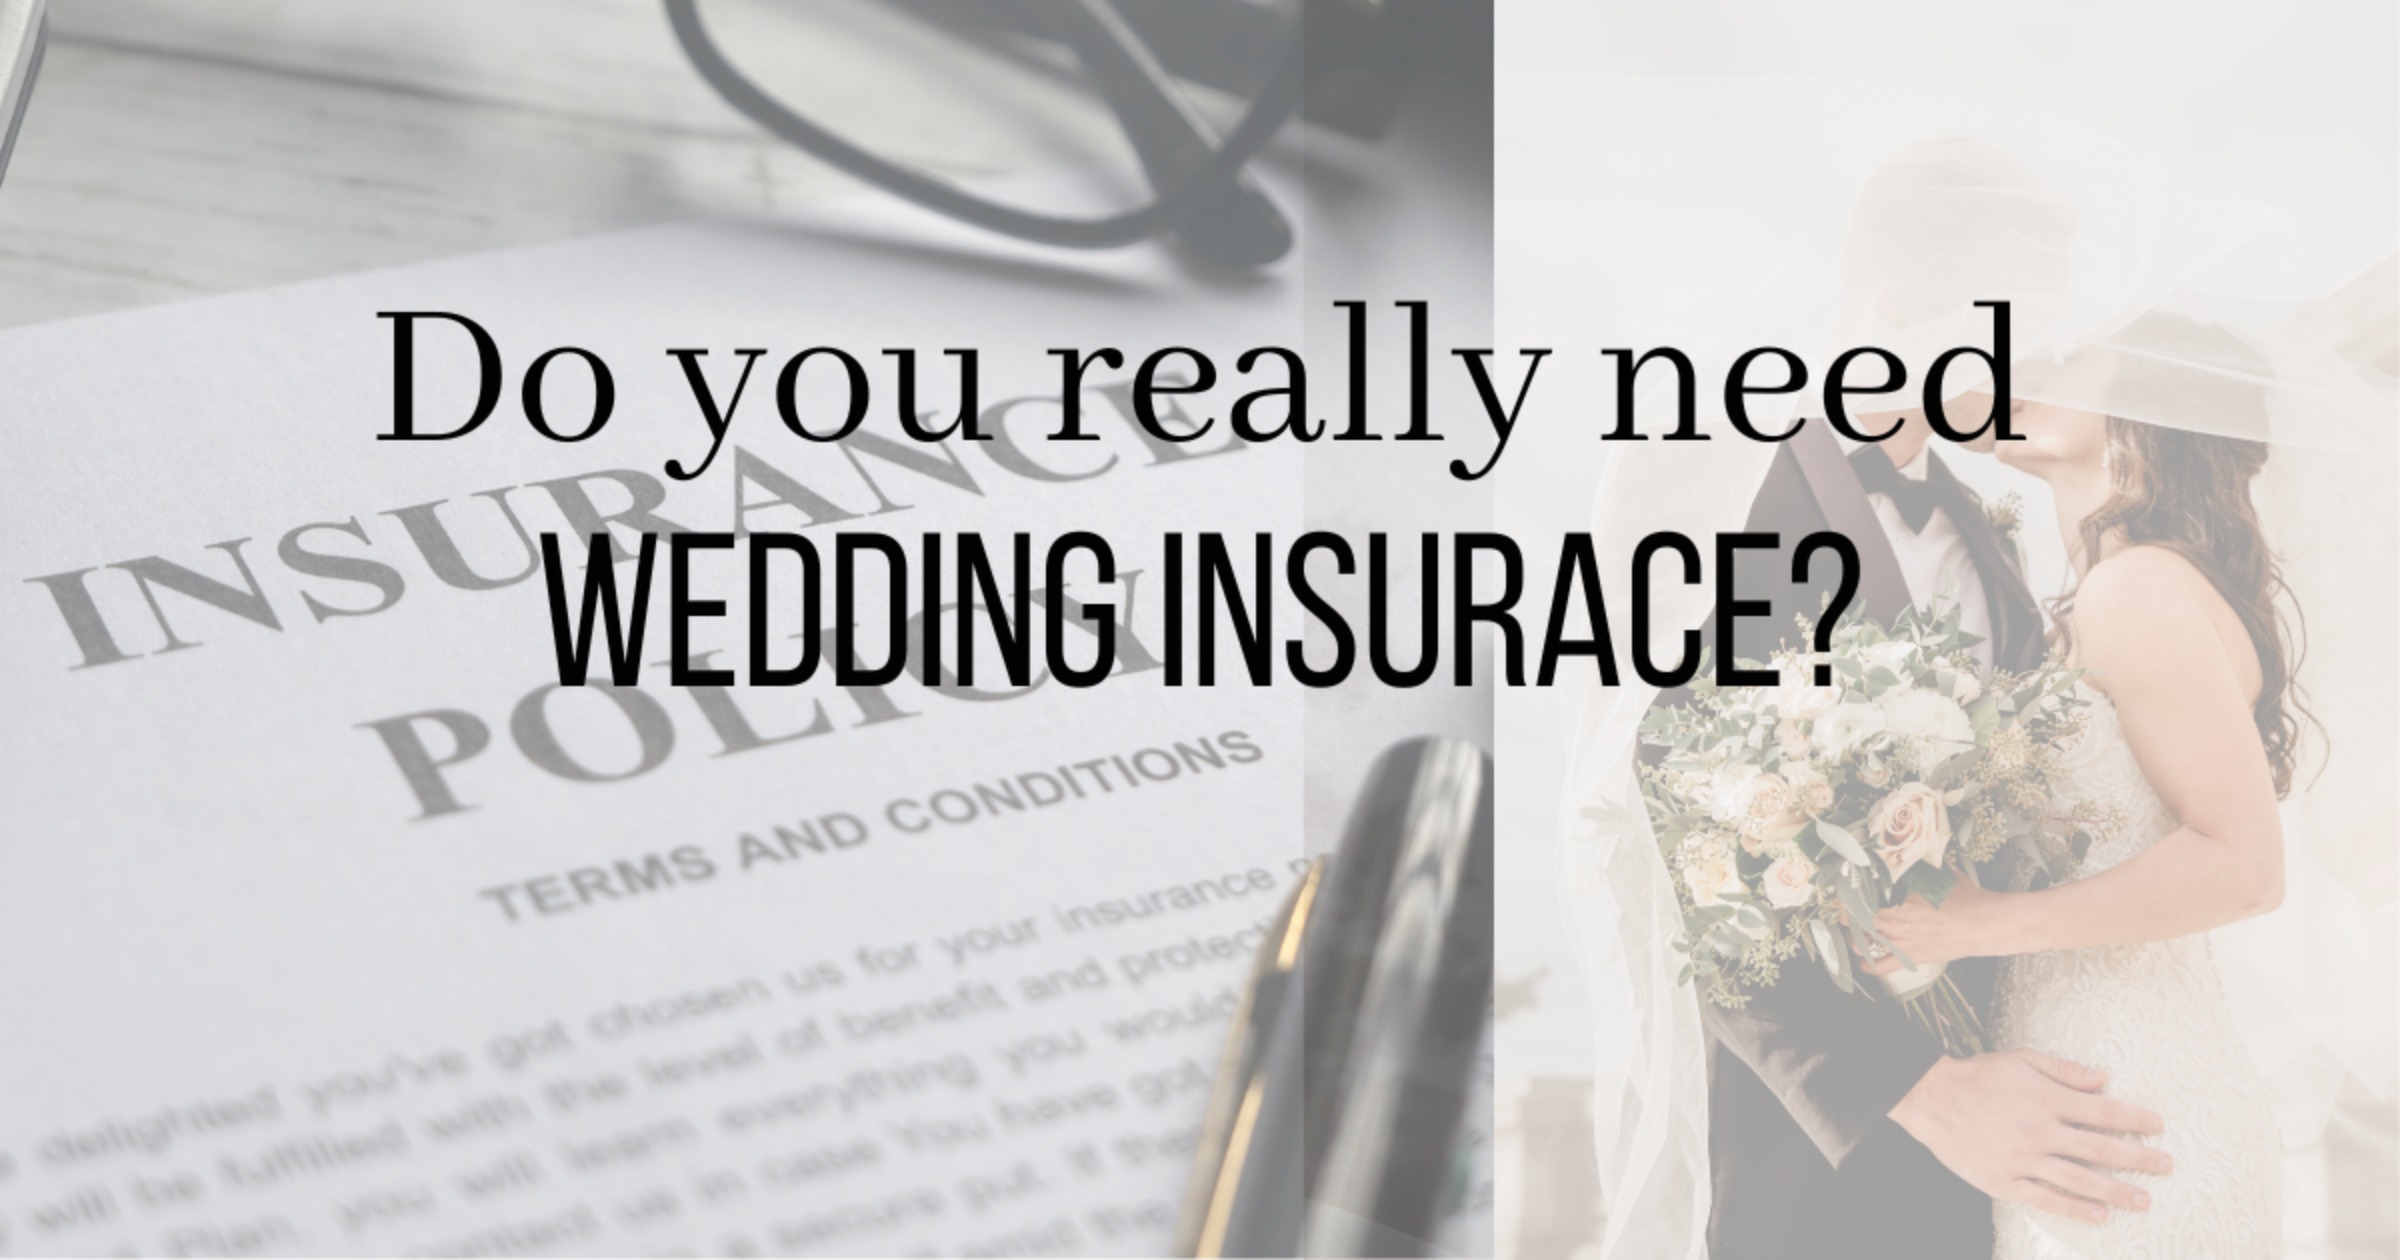 What Is Wedding Insurance And Do You Need It? Front Row Insurance Answers All This And More